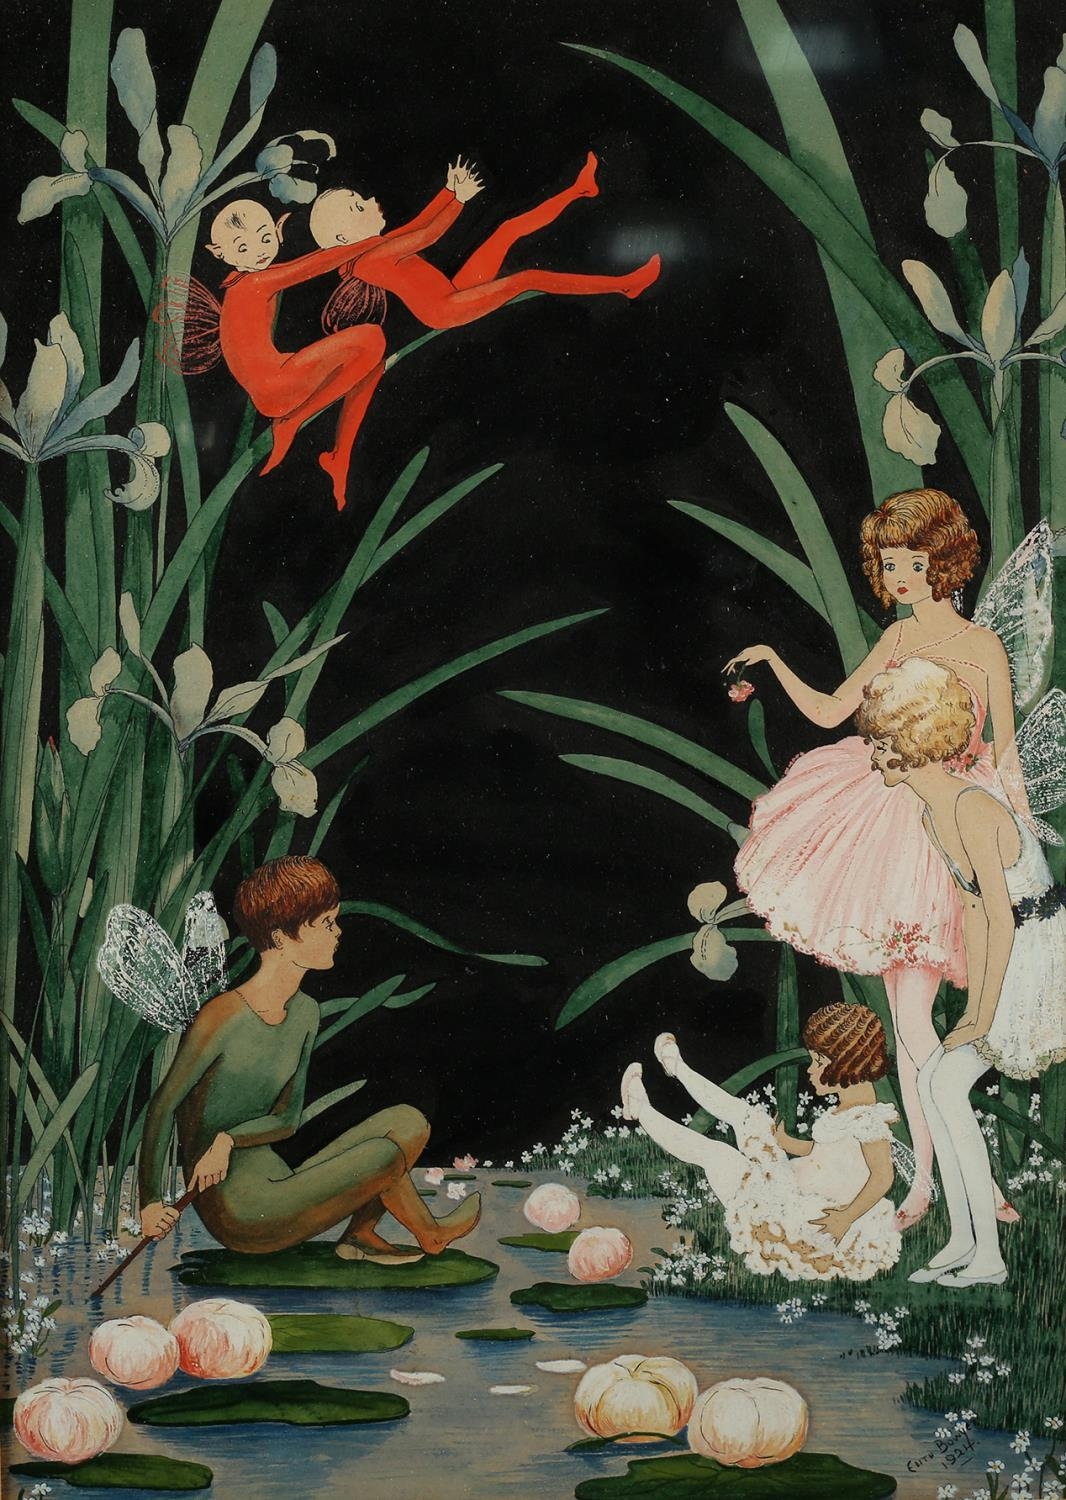 EDYTHE BOWYER (19th/20th century), Fairyfolk amongst Iris, watercolour and gouache, signed and dated - Image 2 of 6